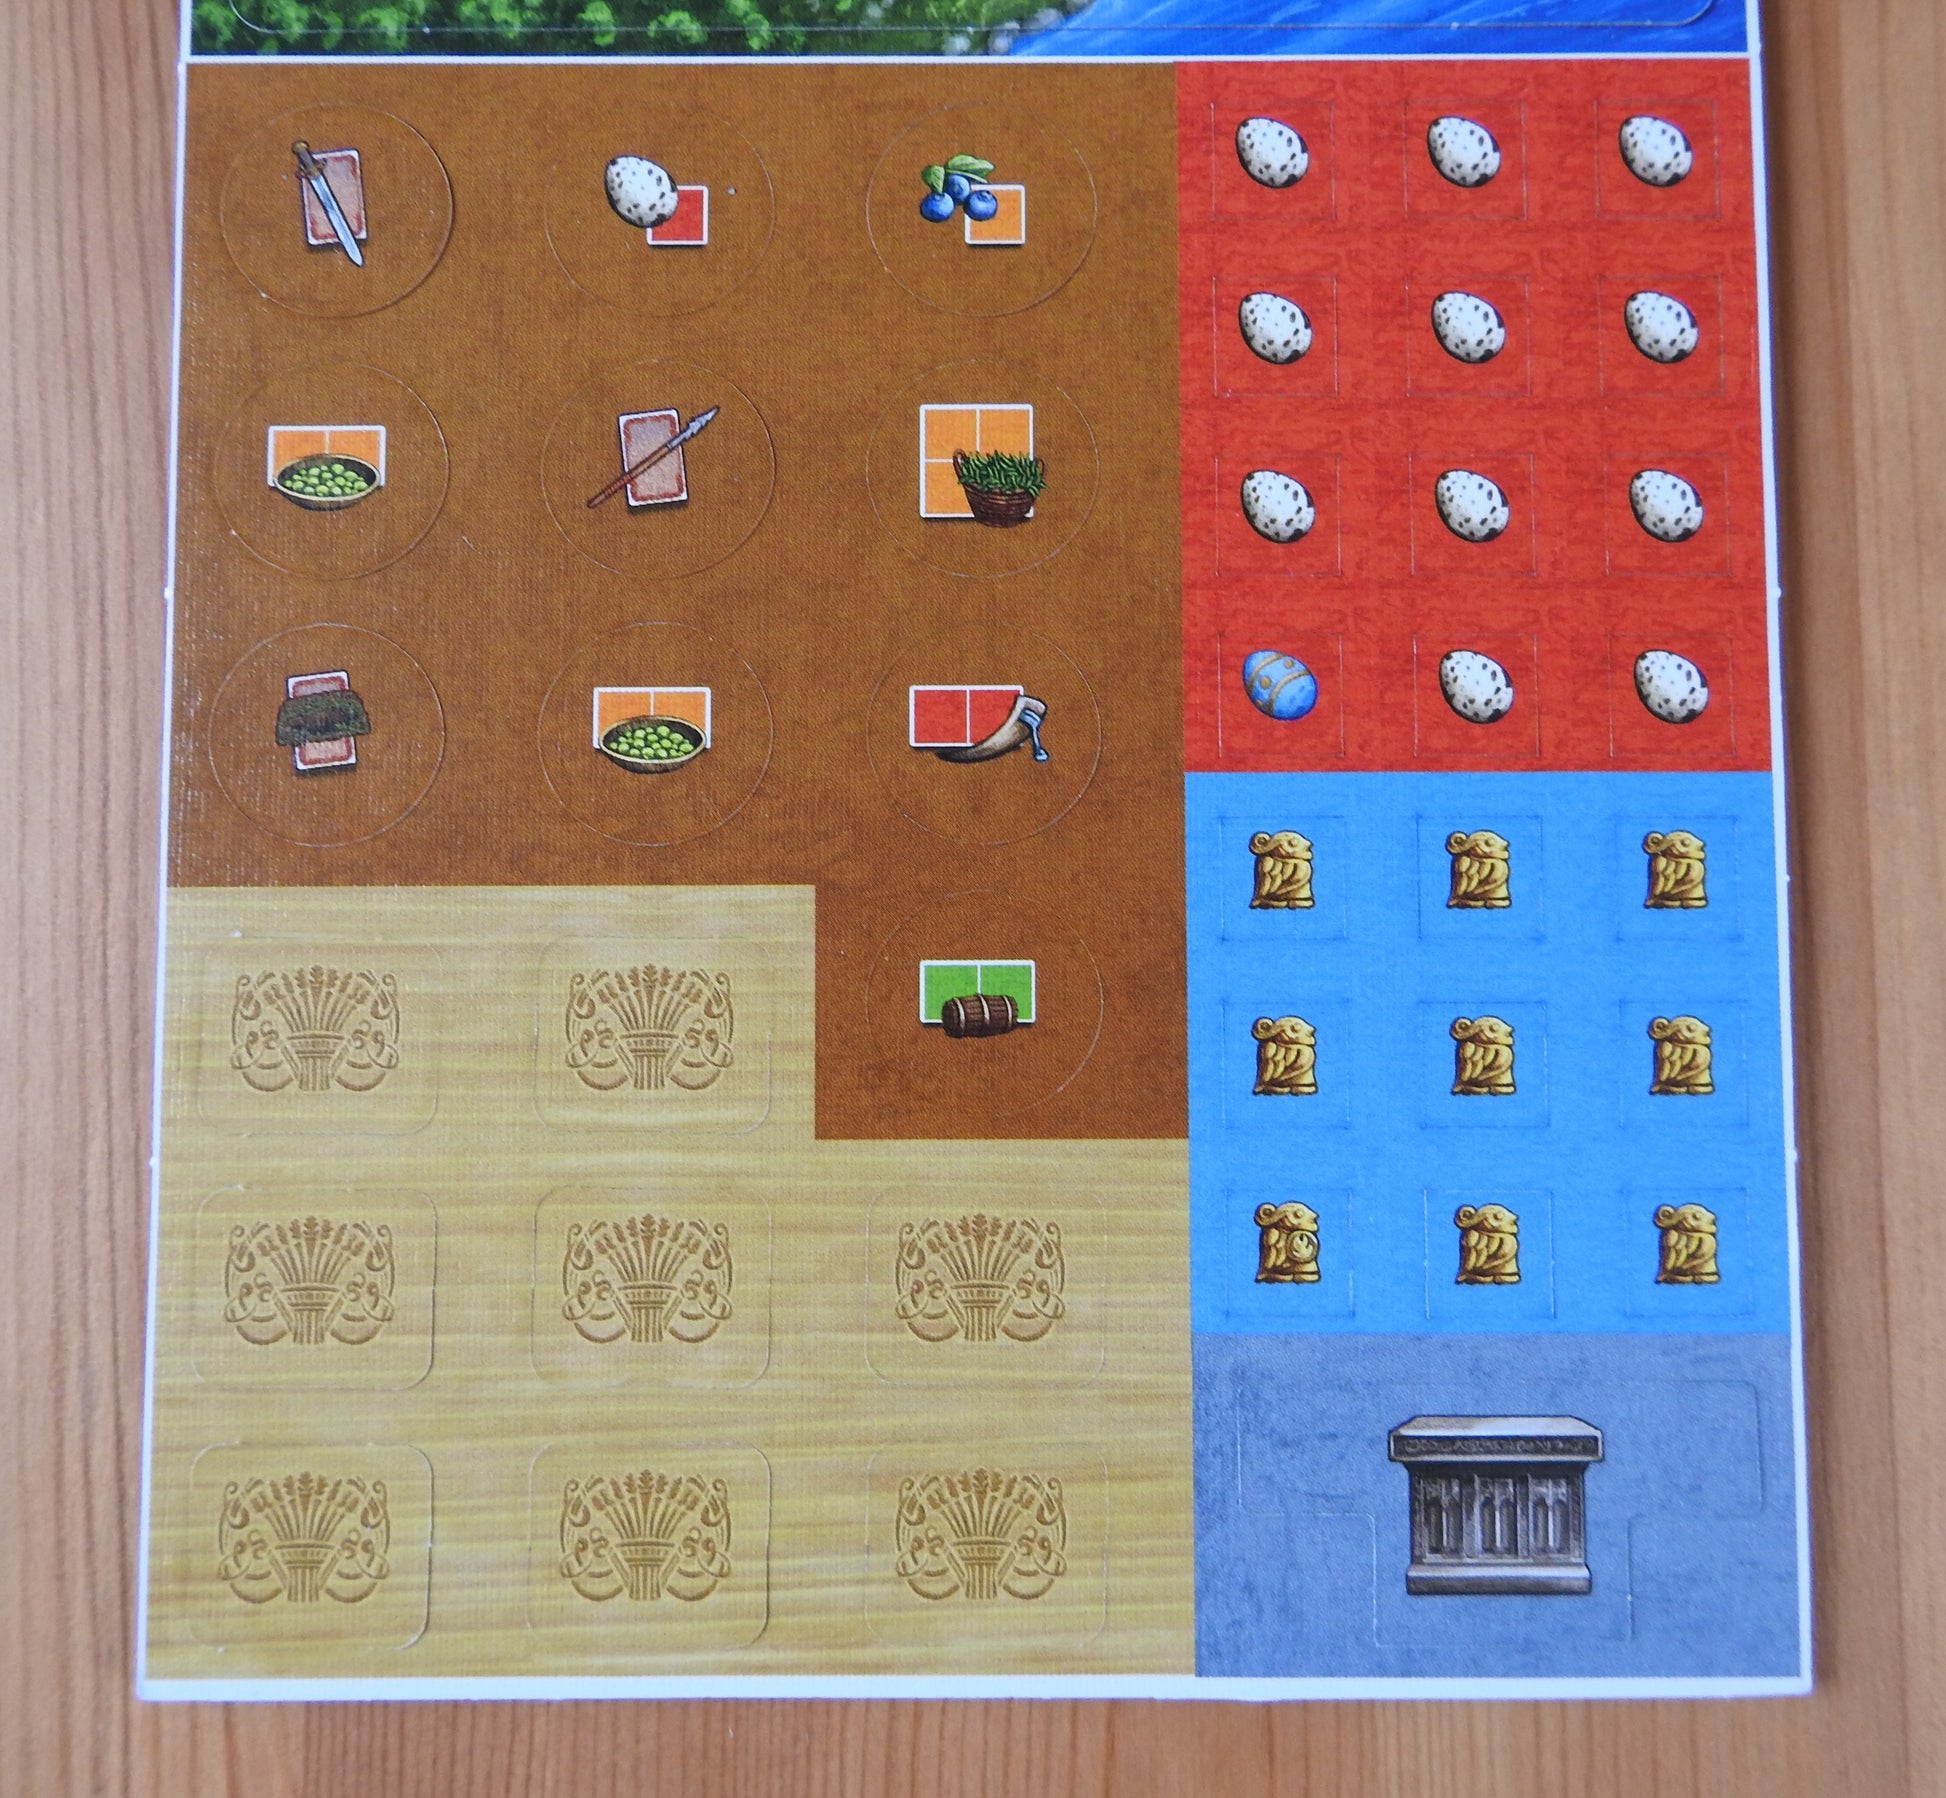 Closer view of the reverse side of the new tiles and counters that come with the Mull & Caithness mini expansion for Feast for Odin.